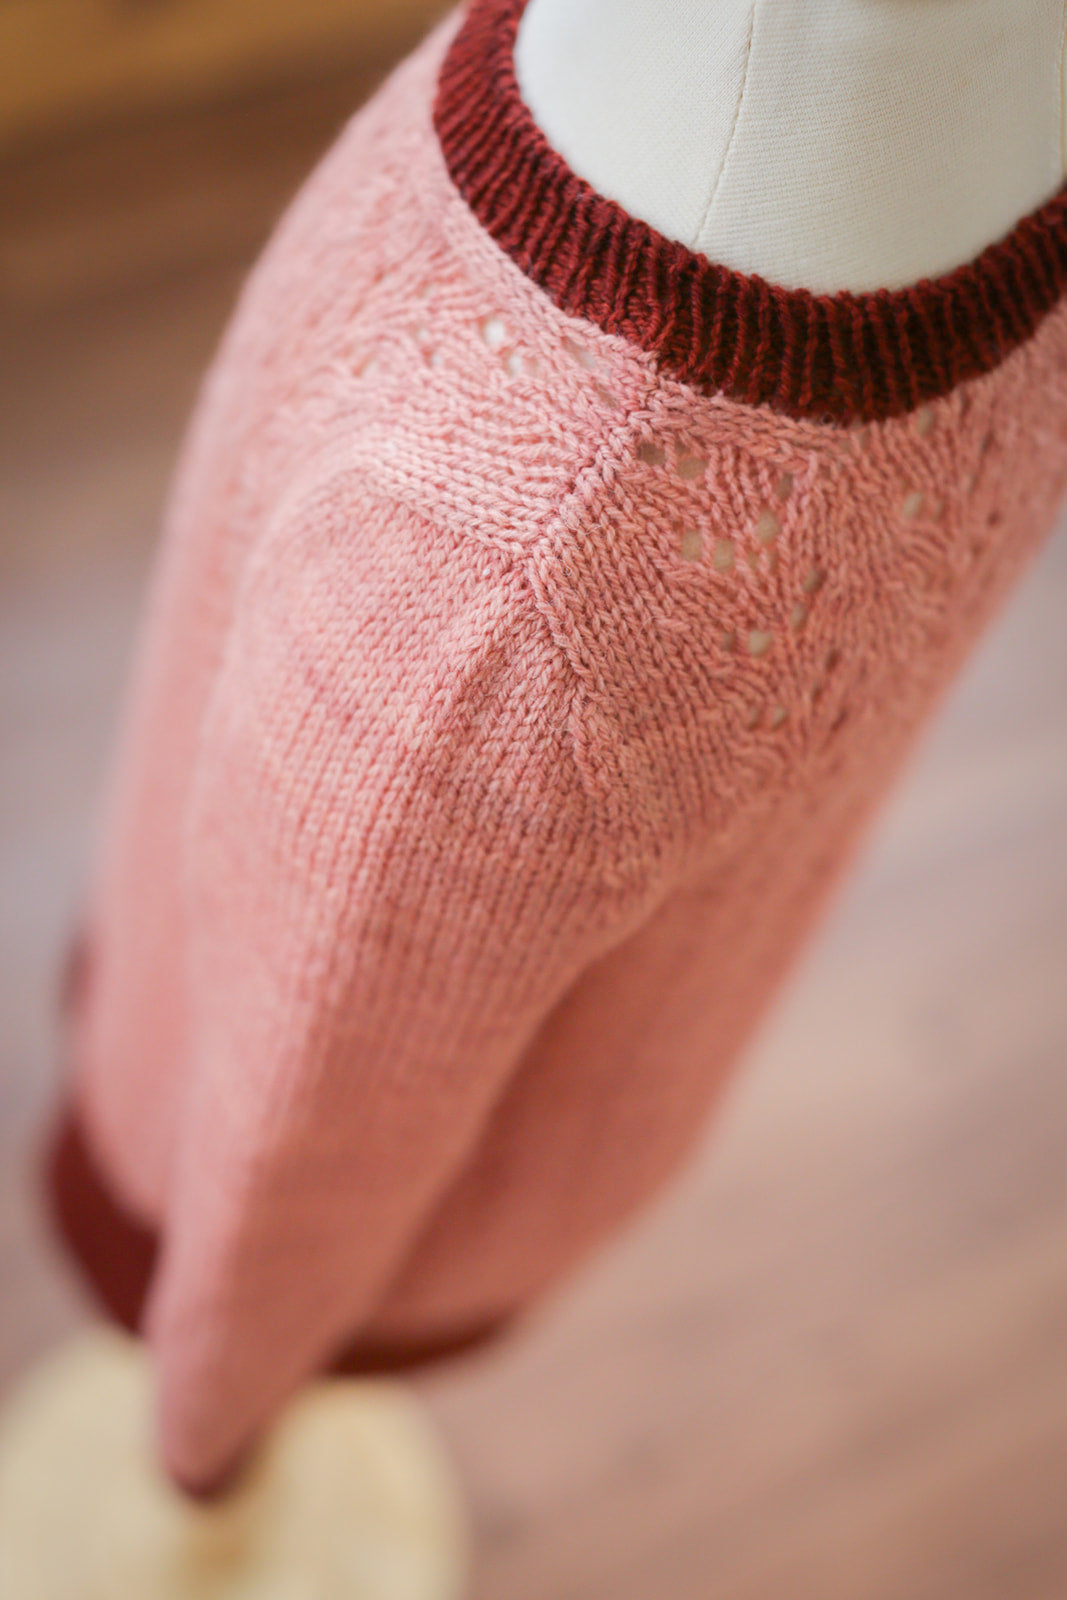 Seen from above, a dress length version of the Kid's Classic sweater - knit in light pink yarn from the lace body and dark pink yarn for the cuffs, hem, and collar - hangs on a dress form. The camera focuses on where the lace detail on the front and back meet at the shoulder seam.